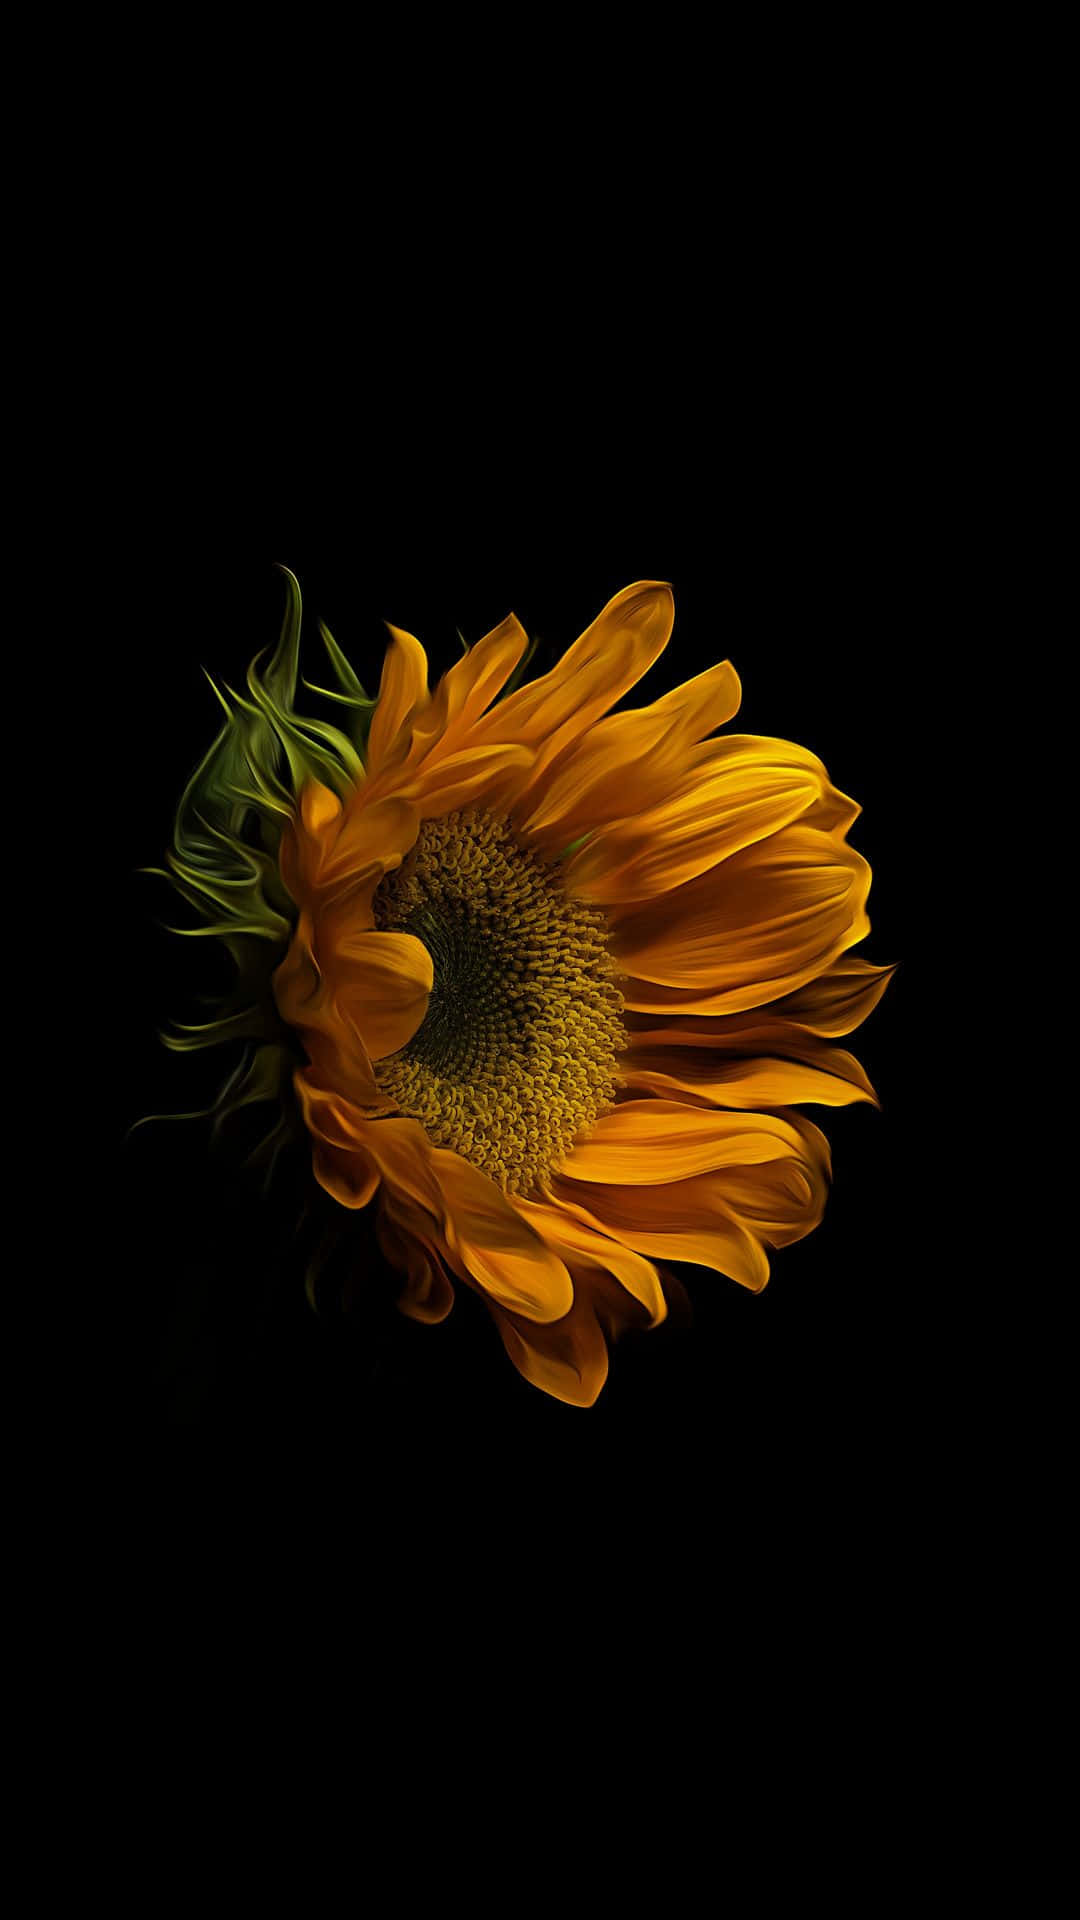 Image  A vibrant dark sunflower against a black and white background Wallpaper